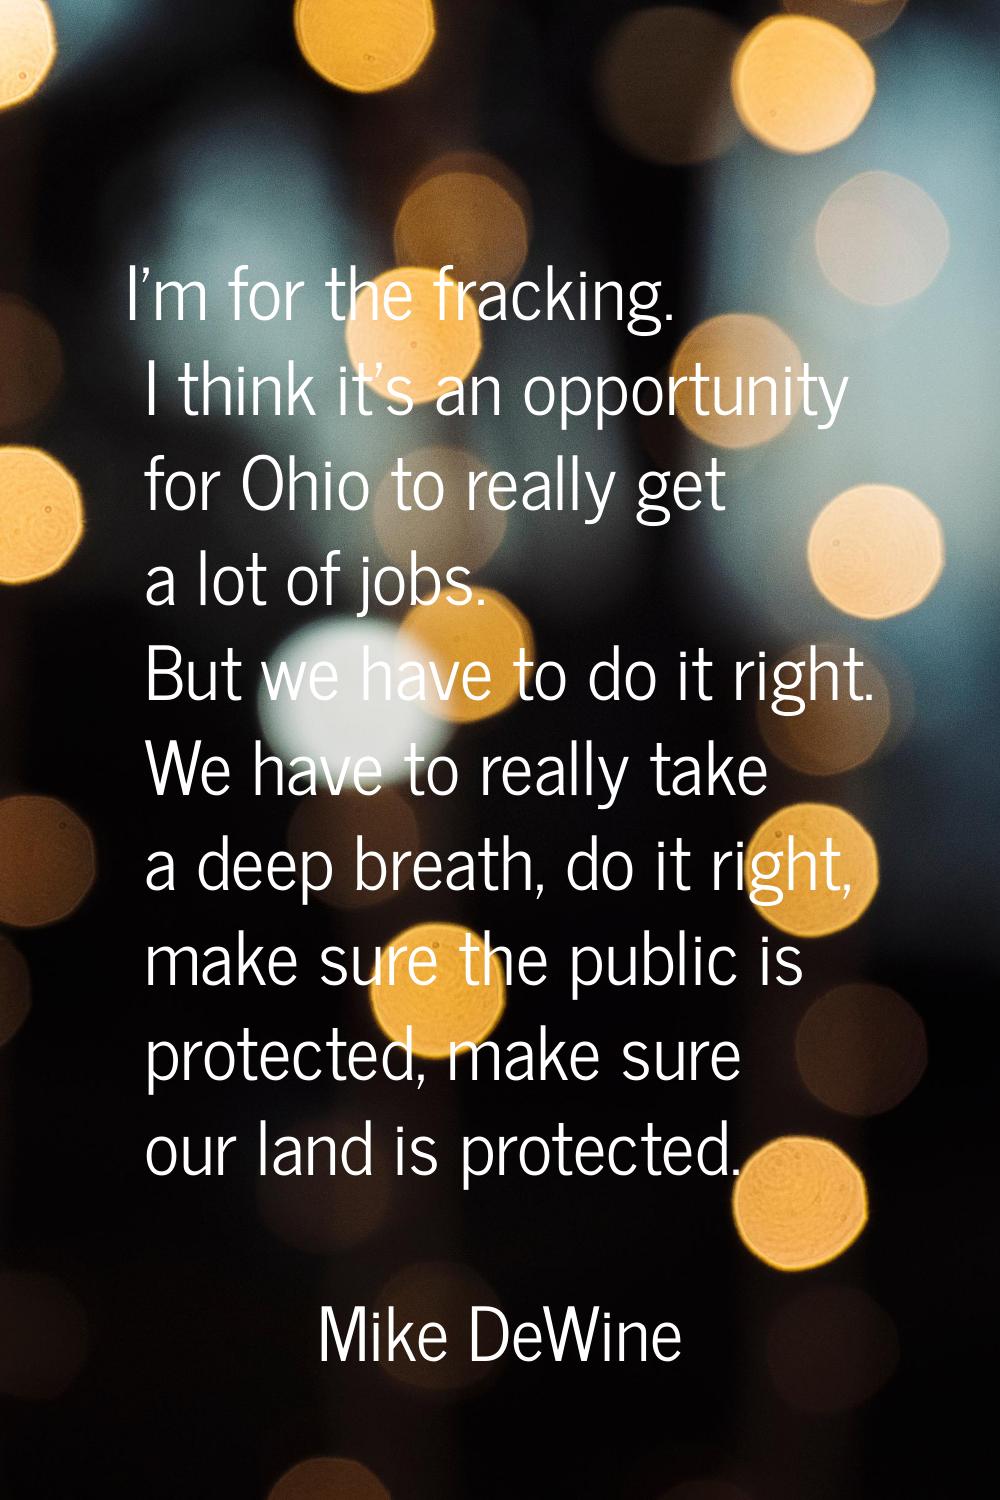 I'm for the fracking. I think it's an opportunity for Ohio to really get a lot of jobs. But we have